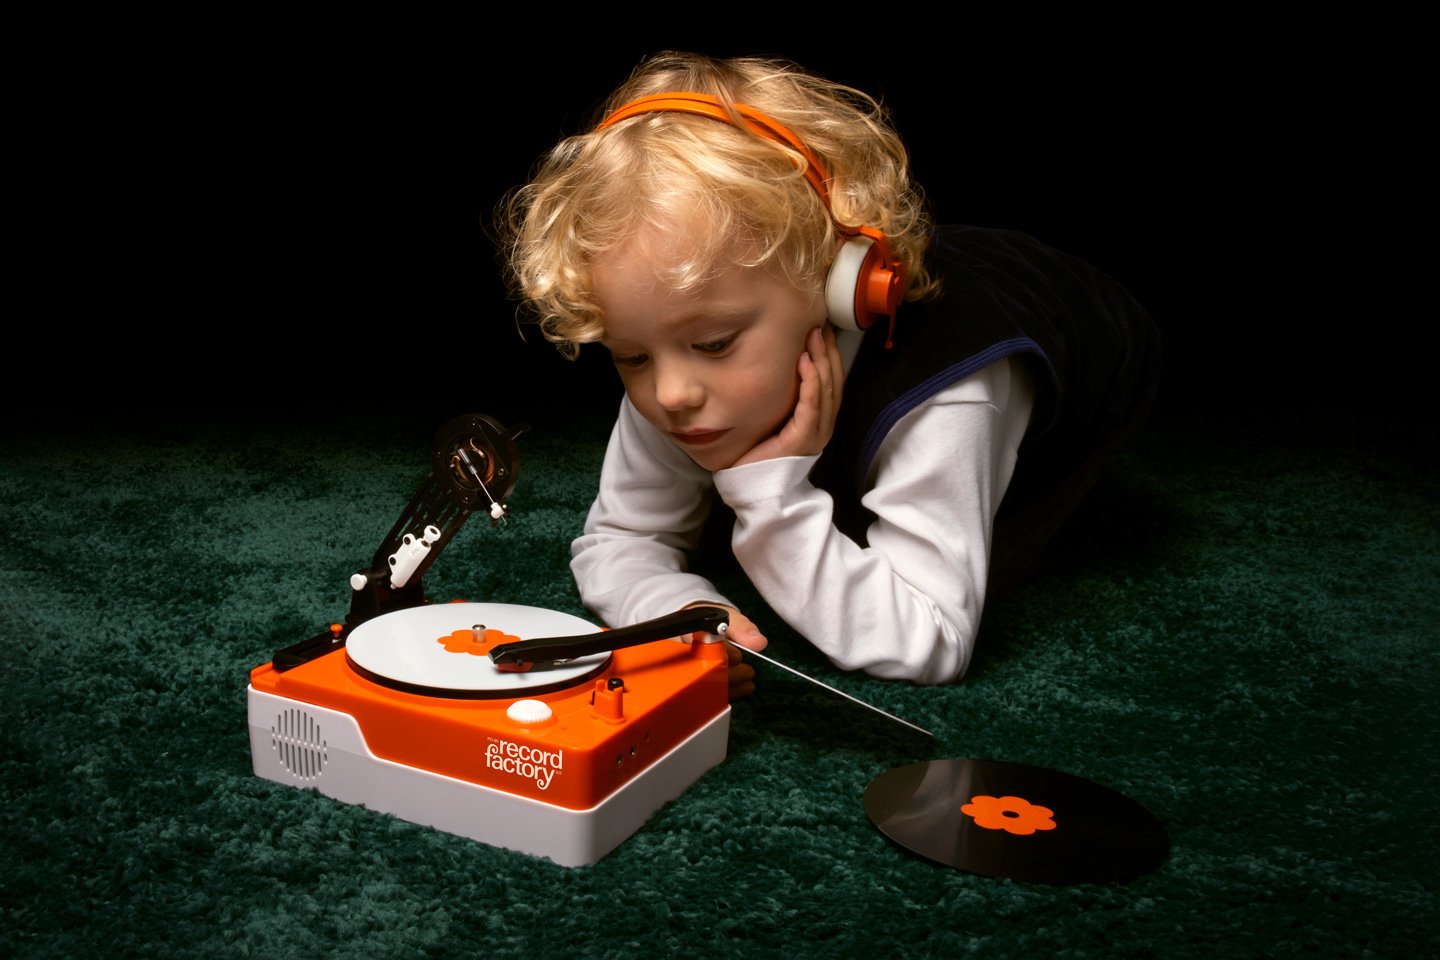 #Teenage Engineering’s latest gizmo is a turntable designed for children to record and produce vinyls on